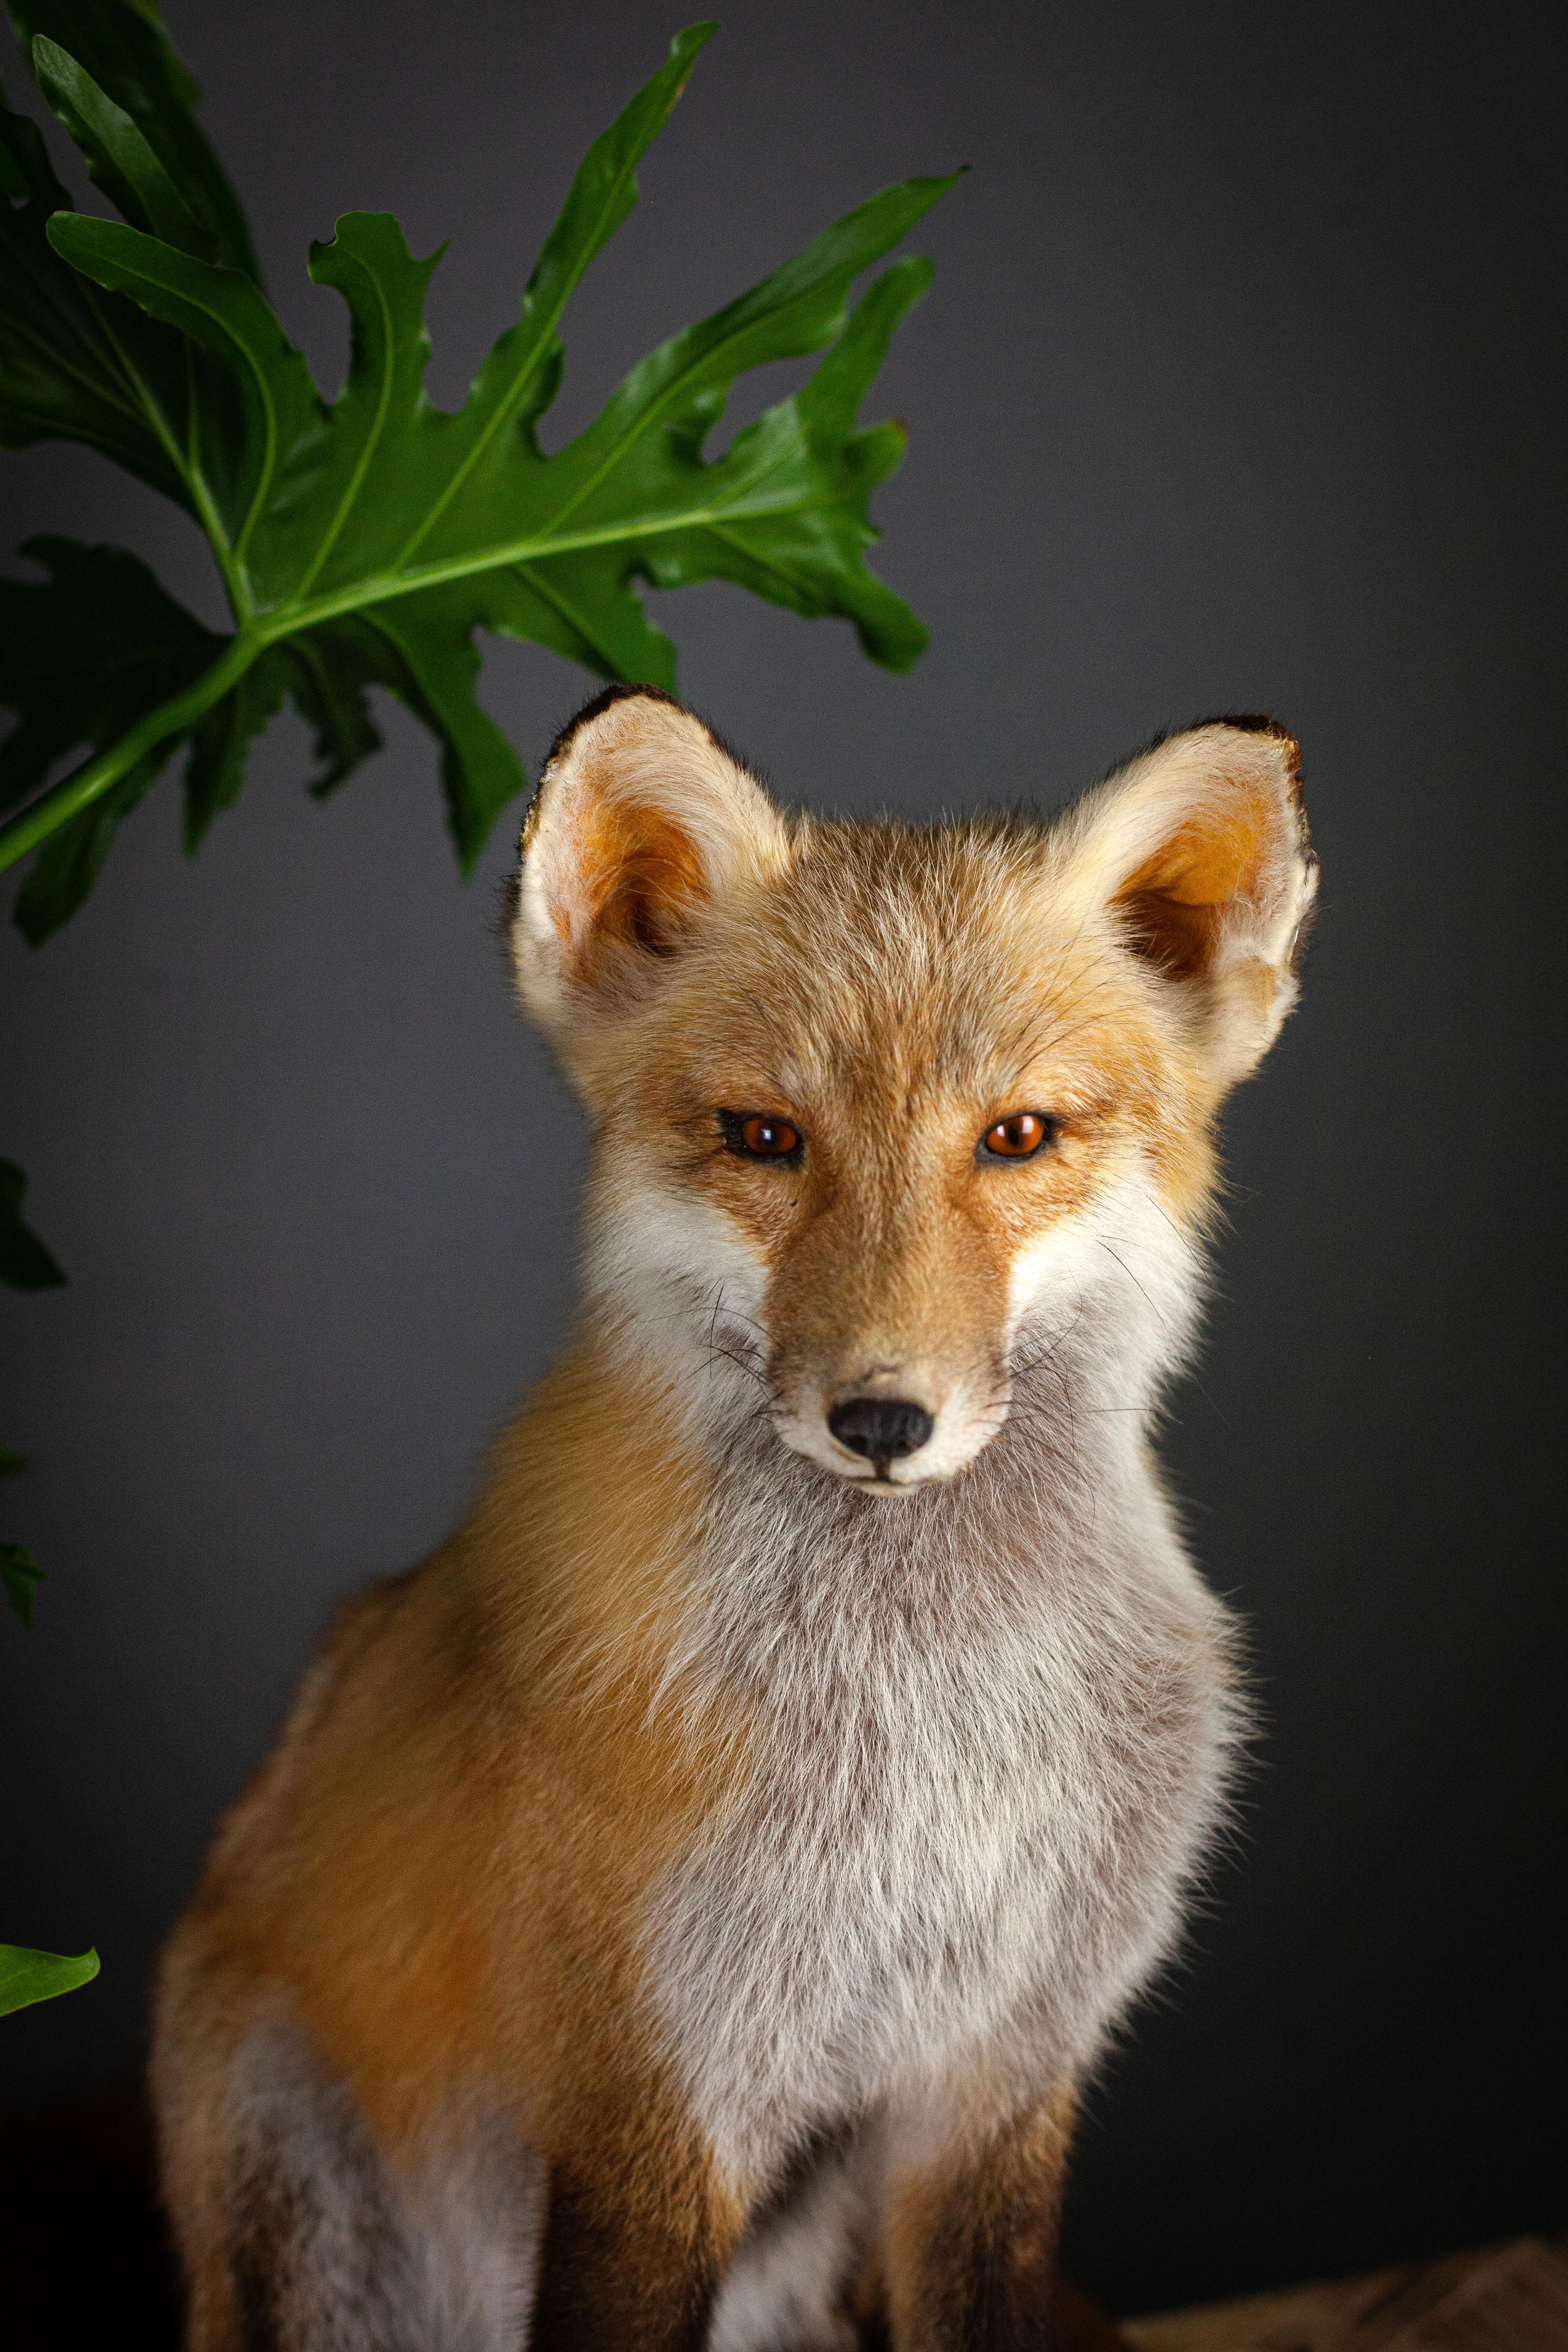 Fleurdetroit presents for your consideration this vintage fox taxidermy. 

American in origin, this handsome fella is looking for the perfect cottage or gentleman's study.